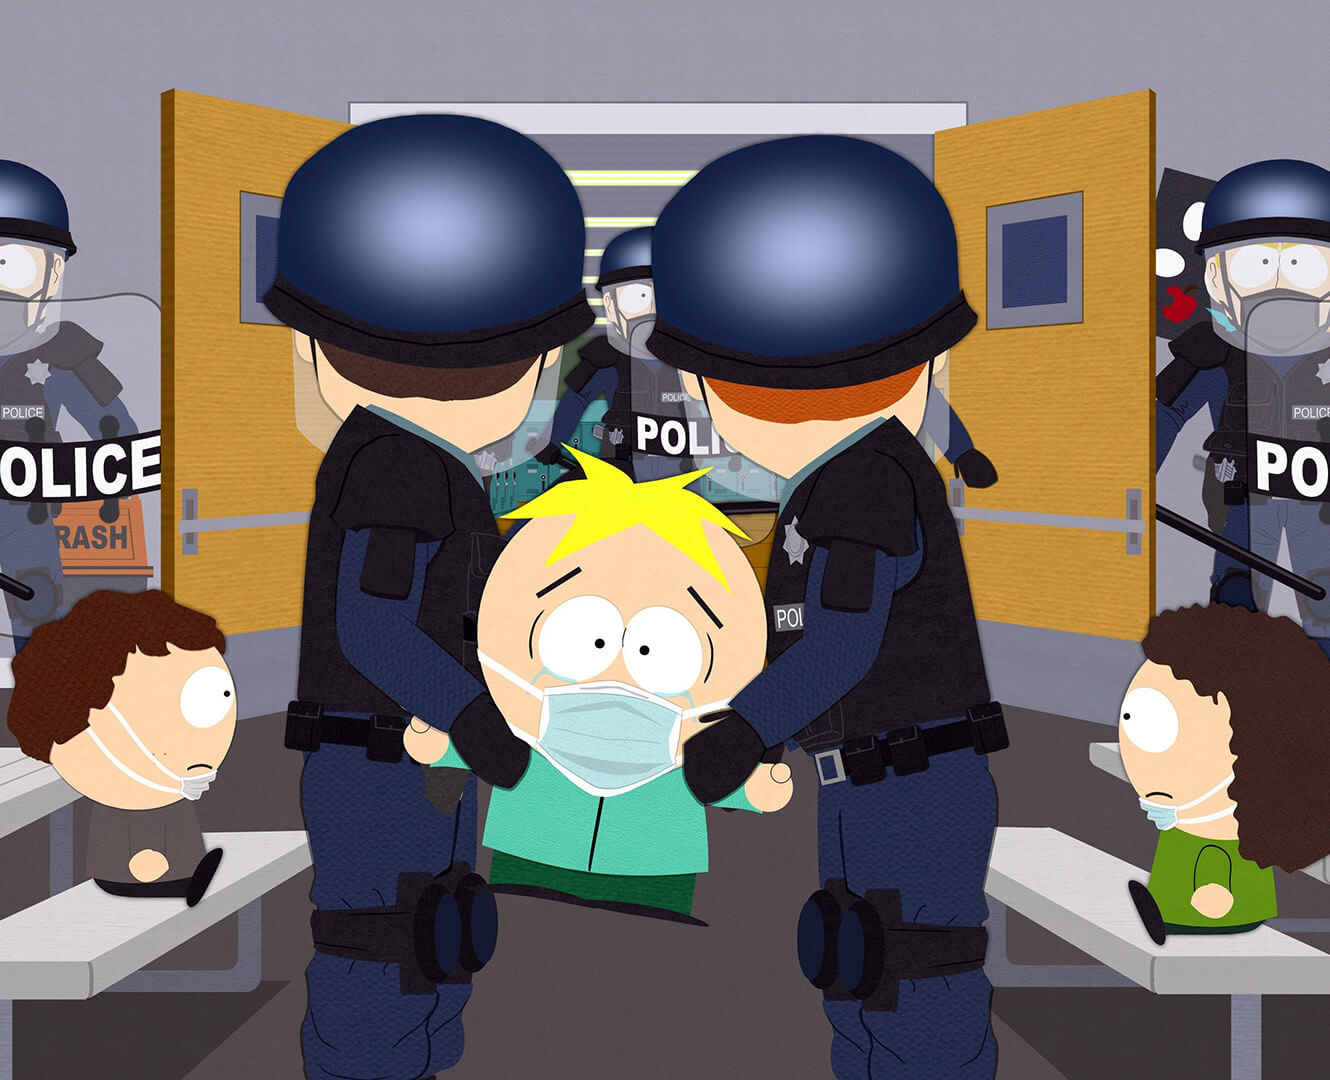 South Park Kenny gets carried away by police officers